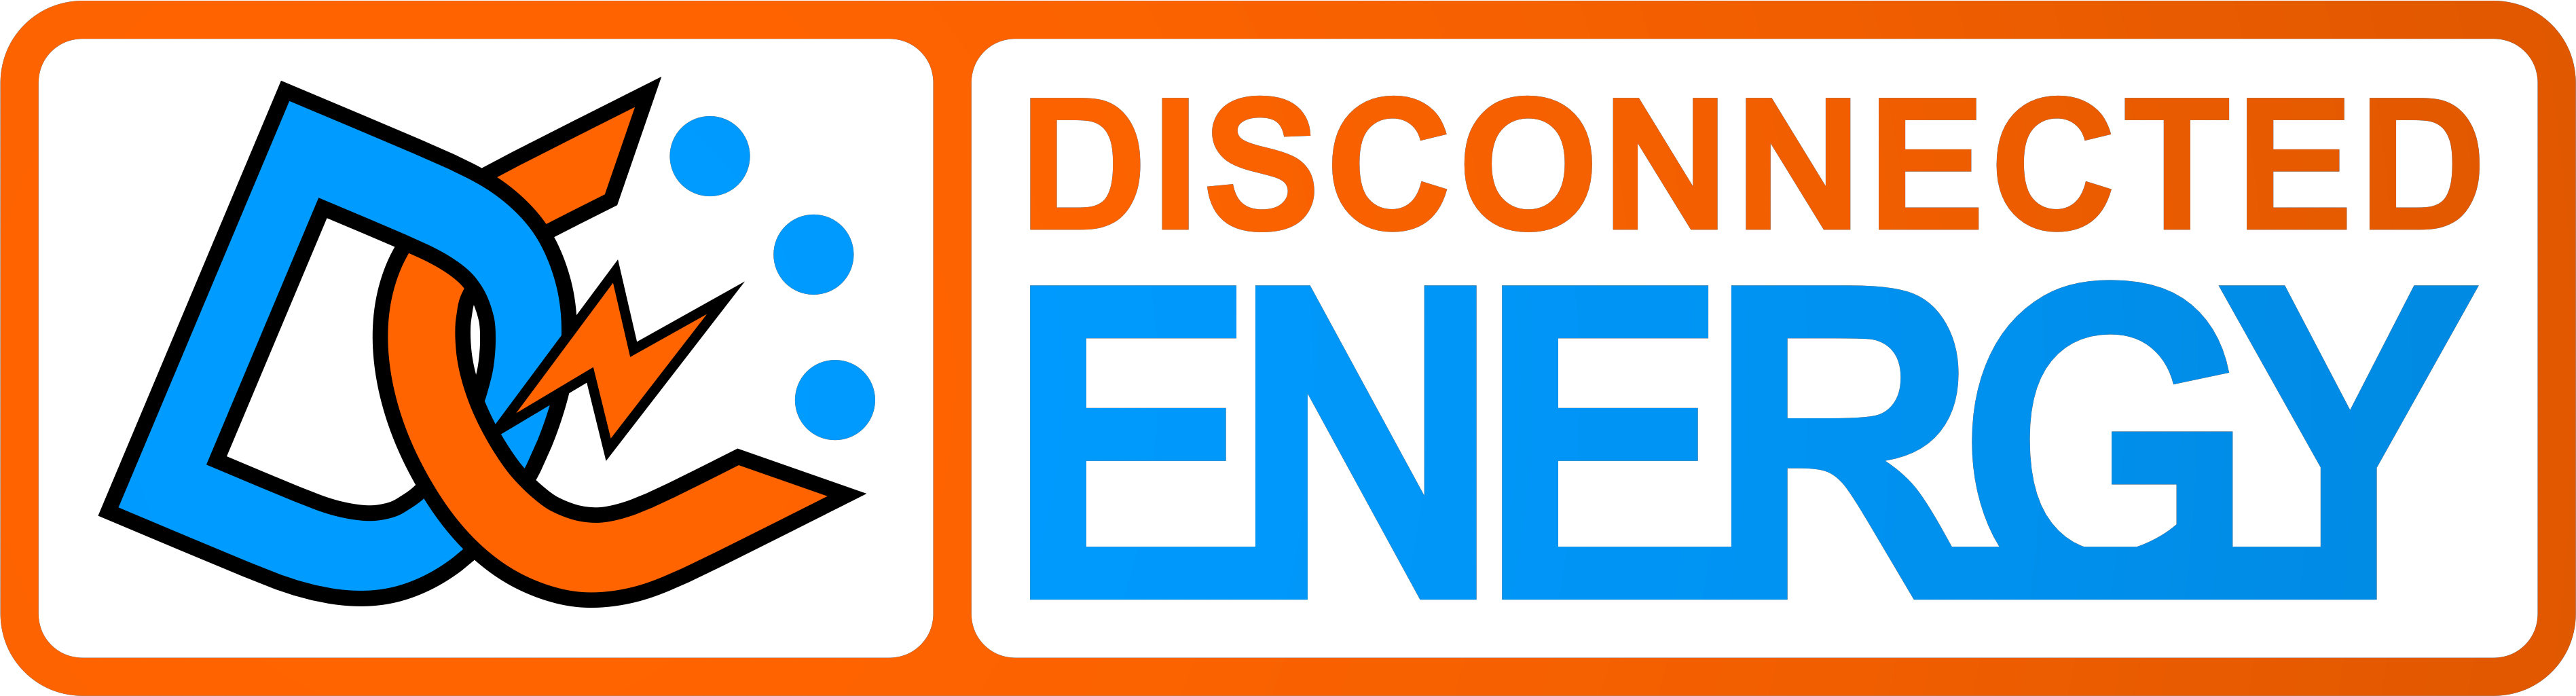 Disconnected Energy